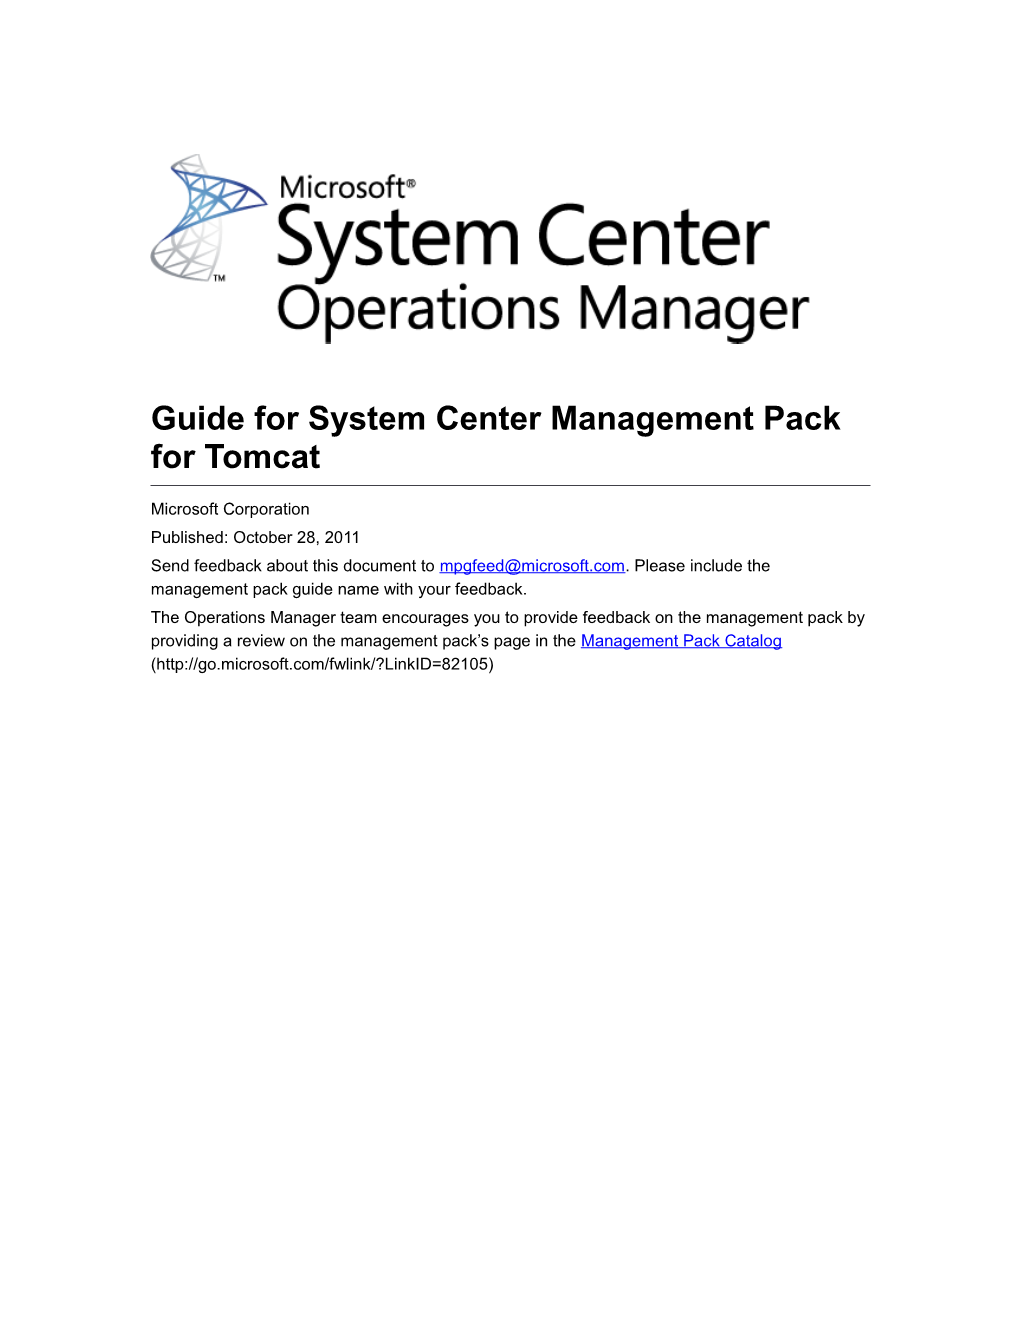 Guide for System Center Management Pack for Tomcat